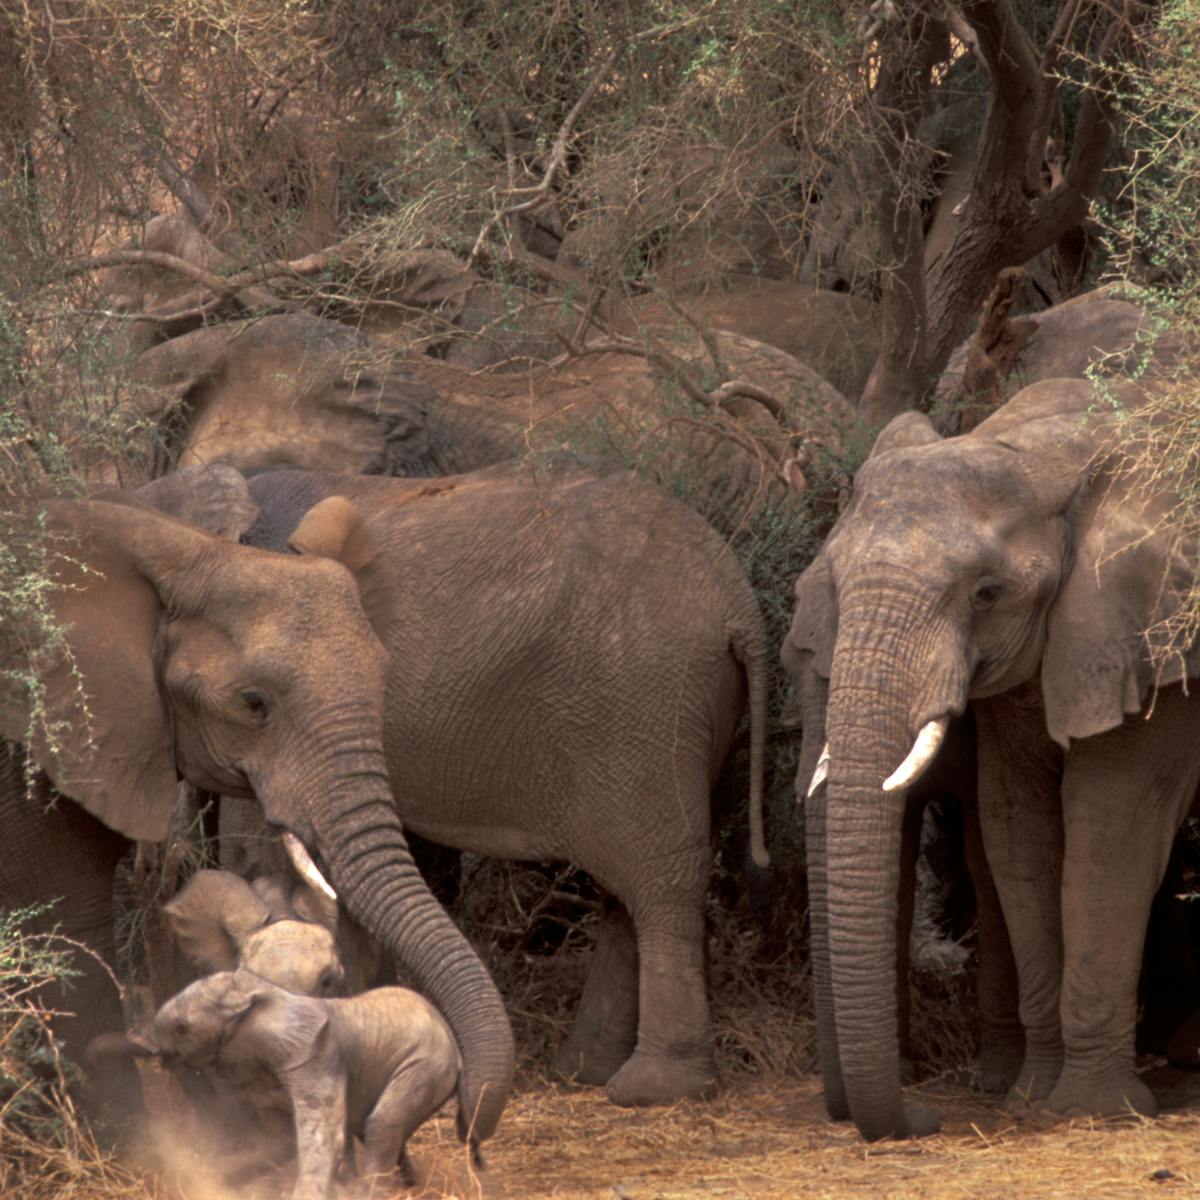 Mali's elephants show how people and nature can share space in a complex  world